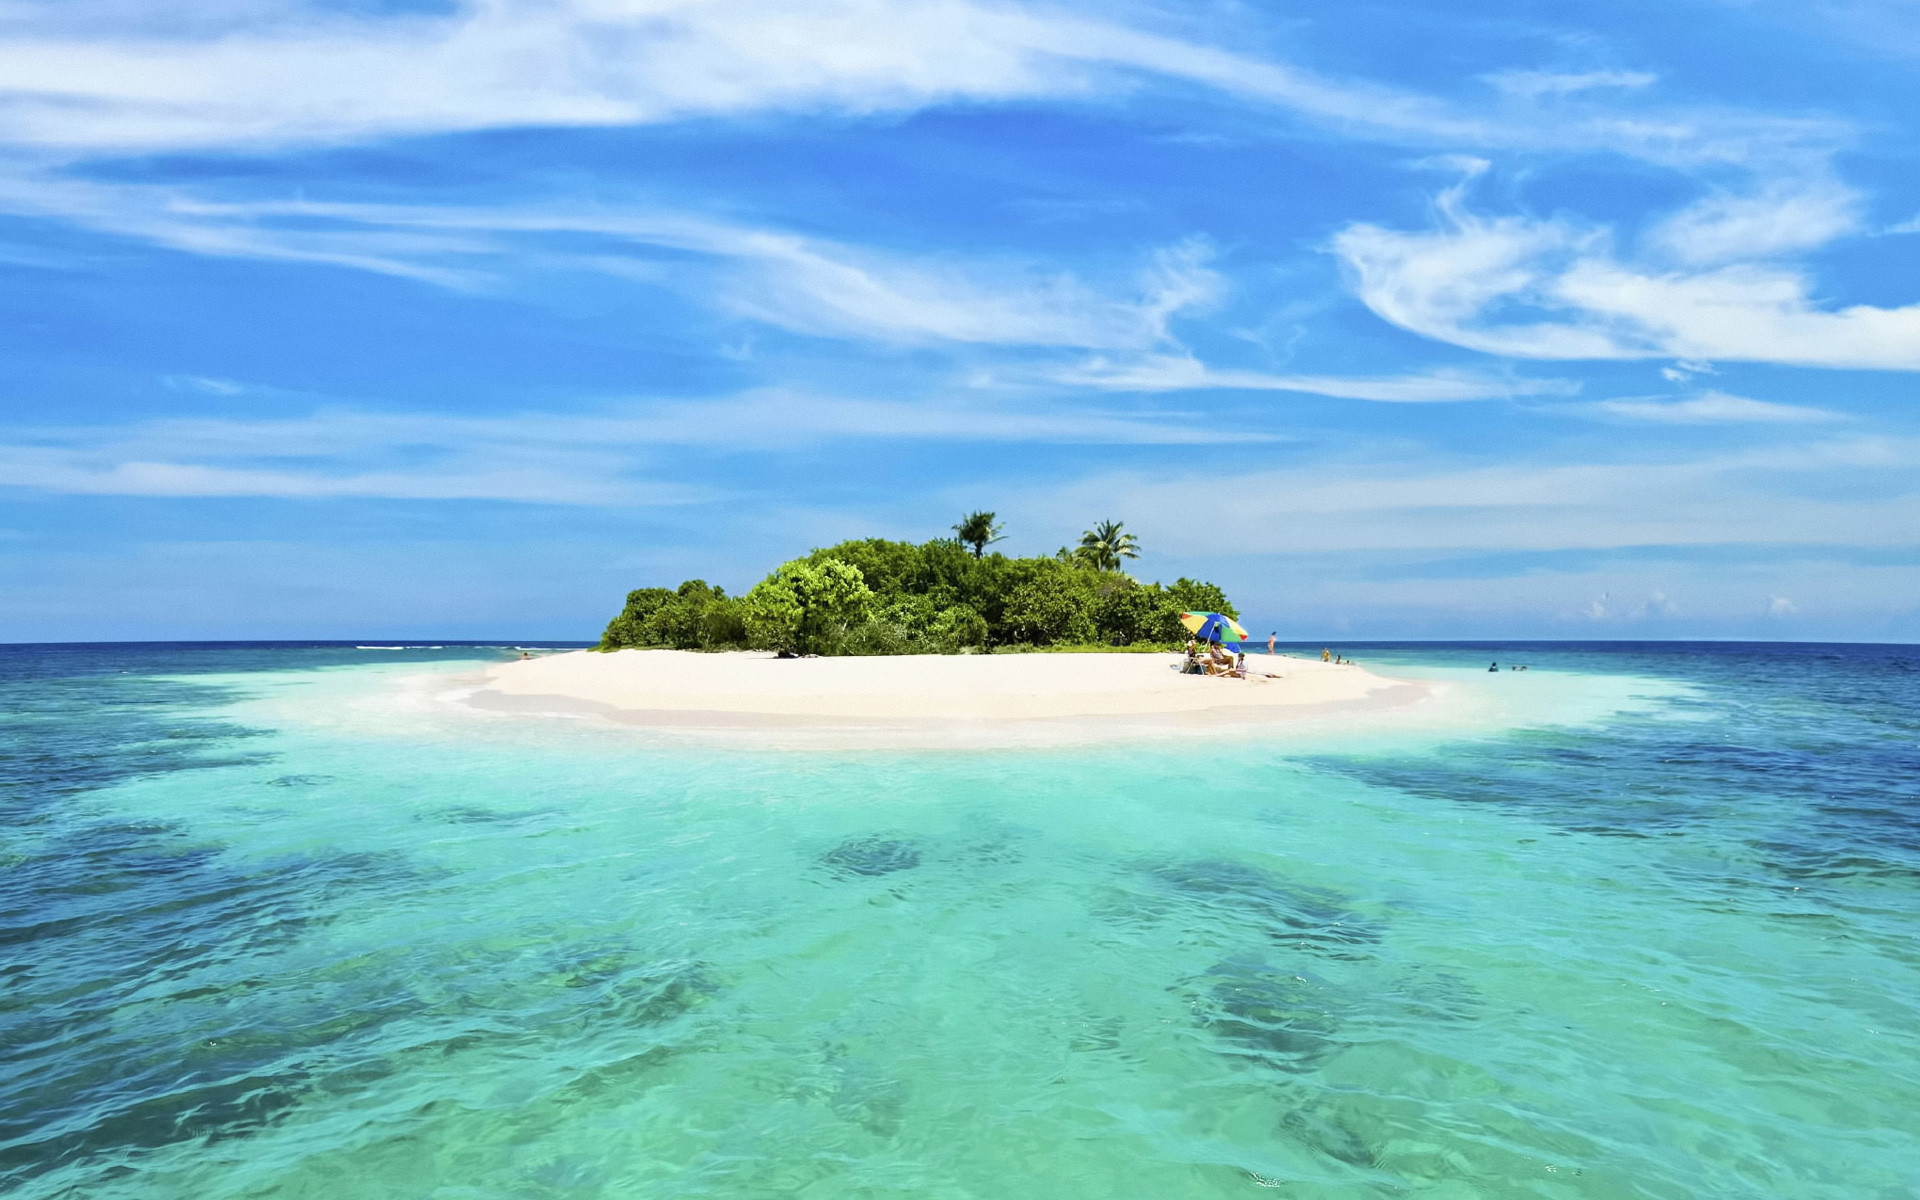 1920x1200 Sandy island in the middle of the ocean wallpaper - Beach Wallpapers